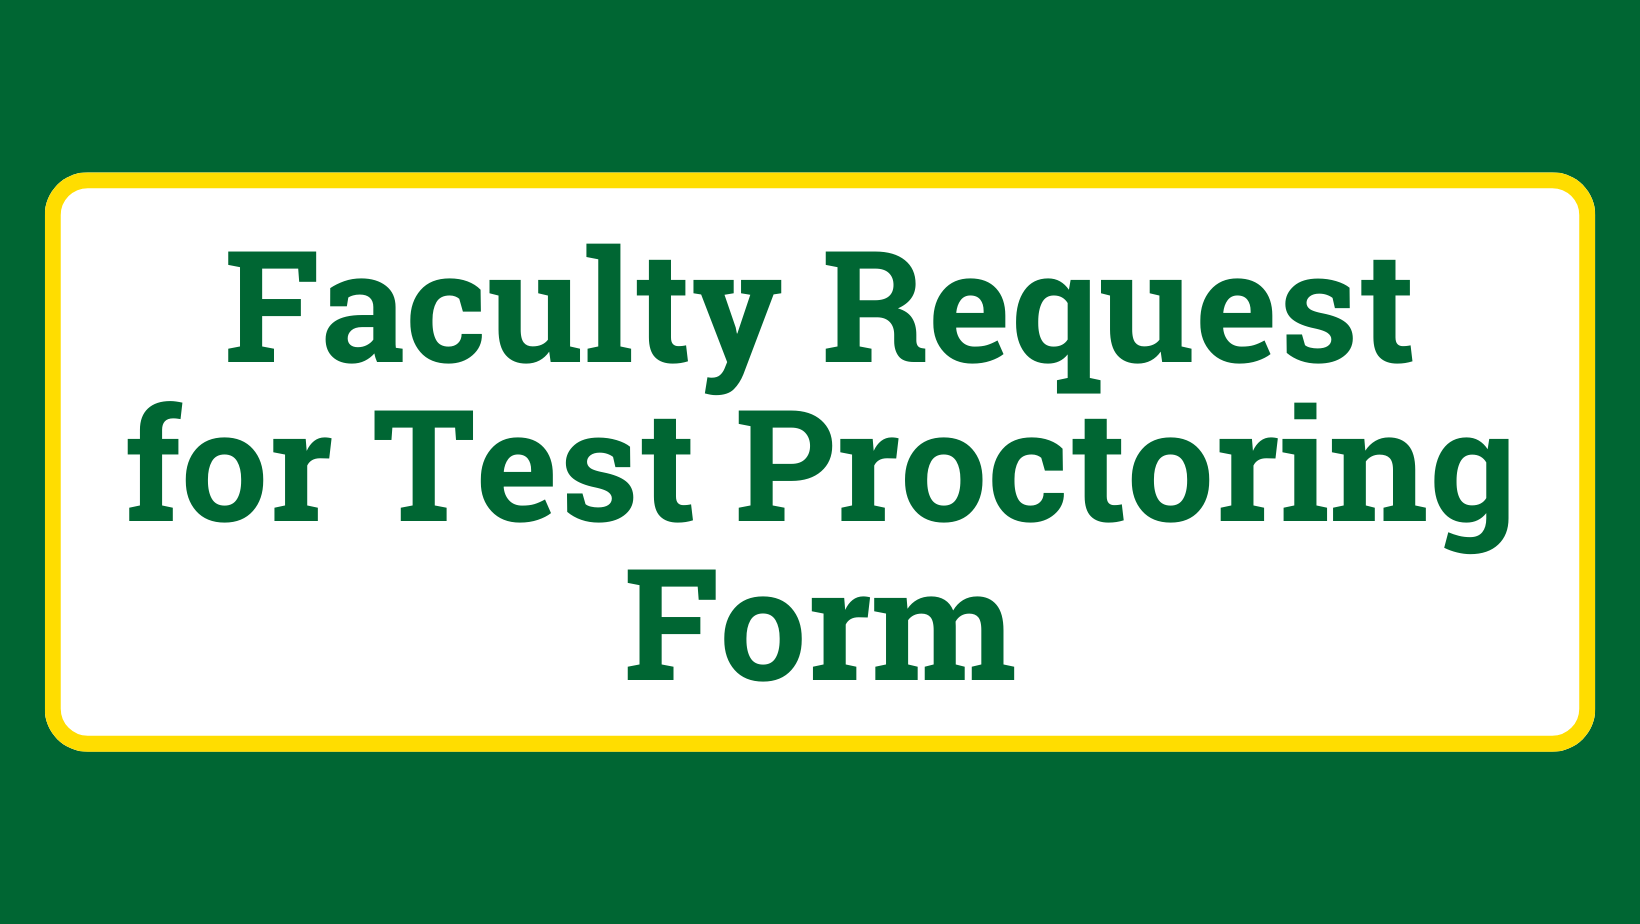 Faculty Request for Test Proctoring Form